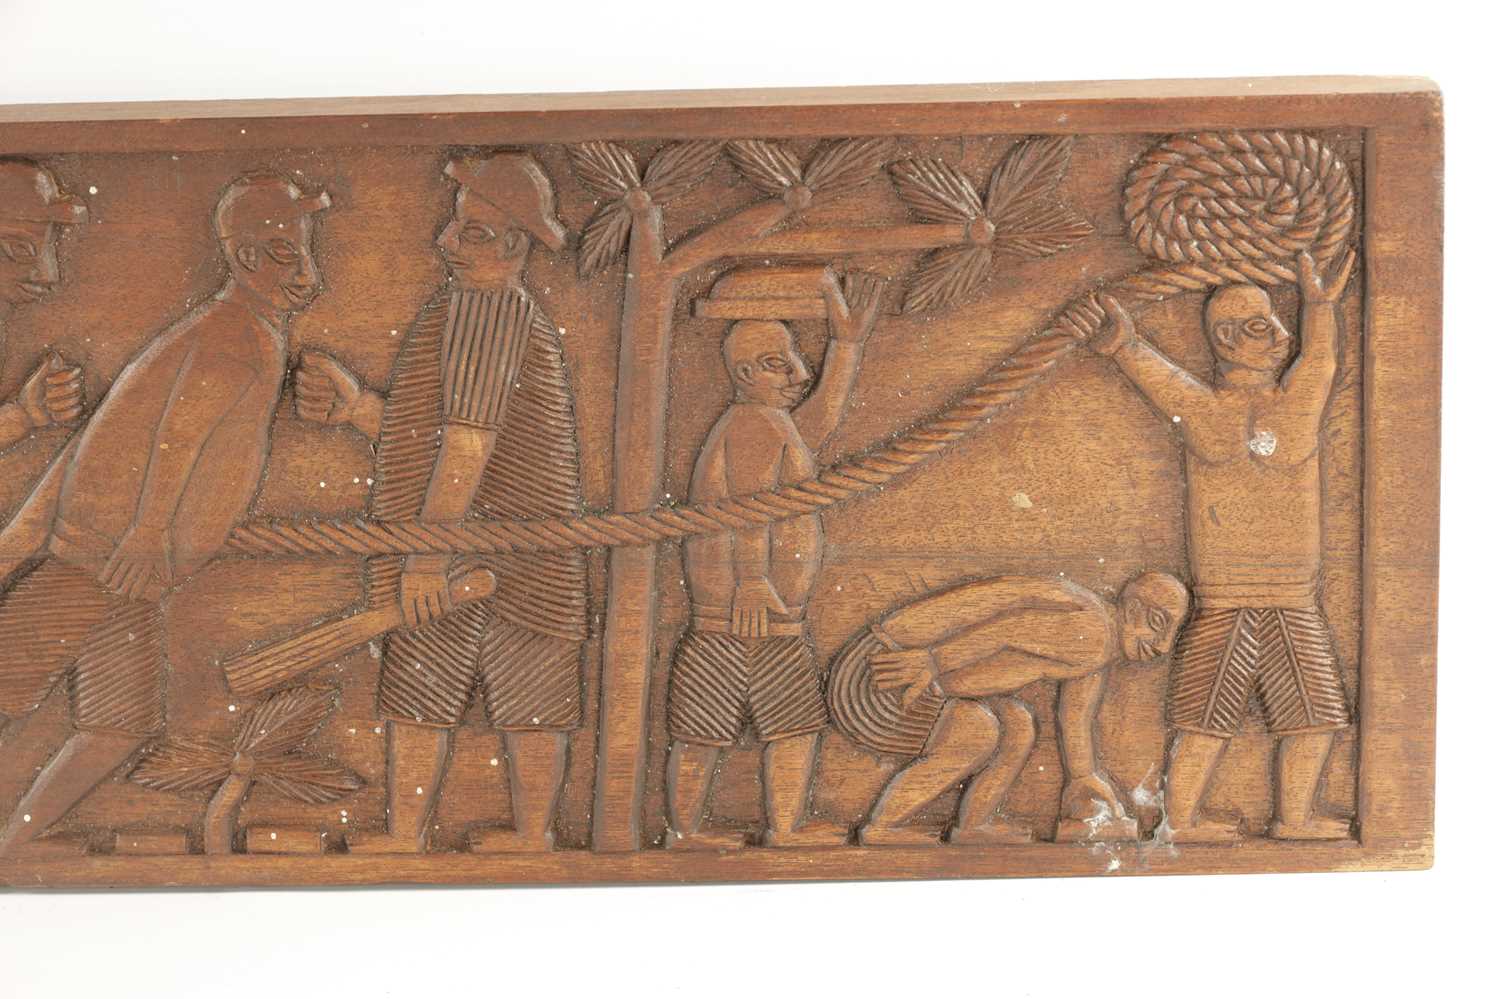 A CAMEROON CARVED HARDWOOD PLAQUE OF SLAVES - Image 6 of 8